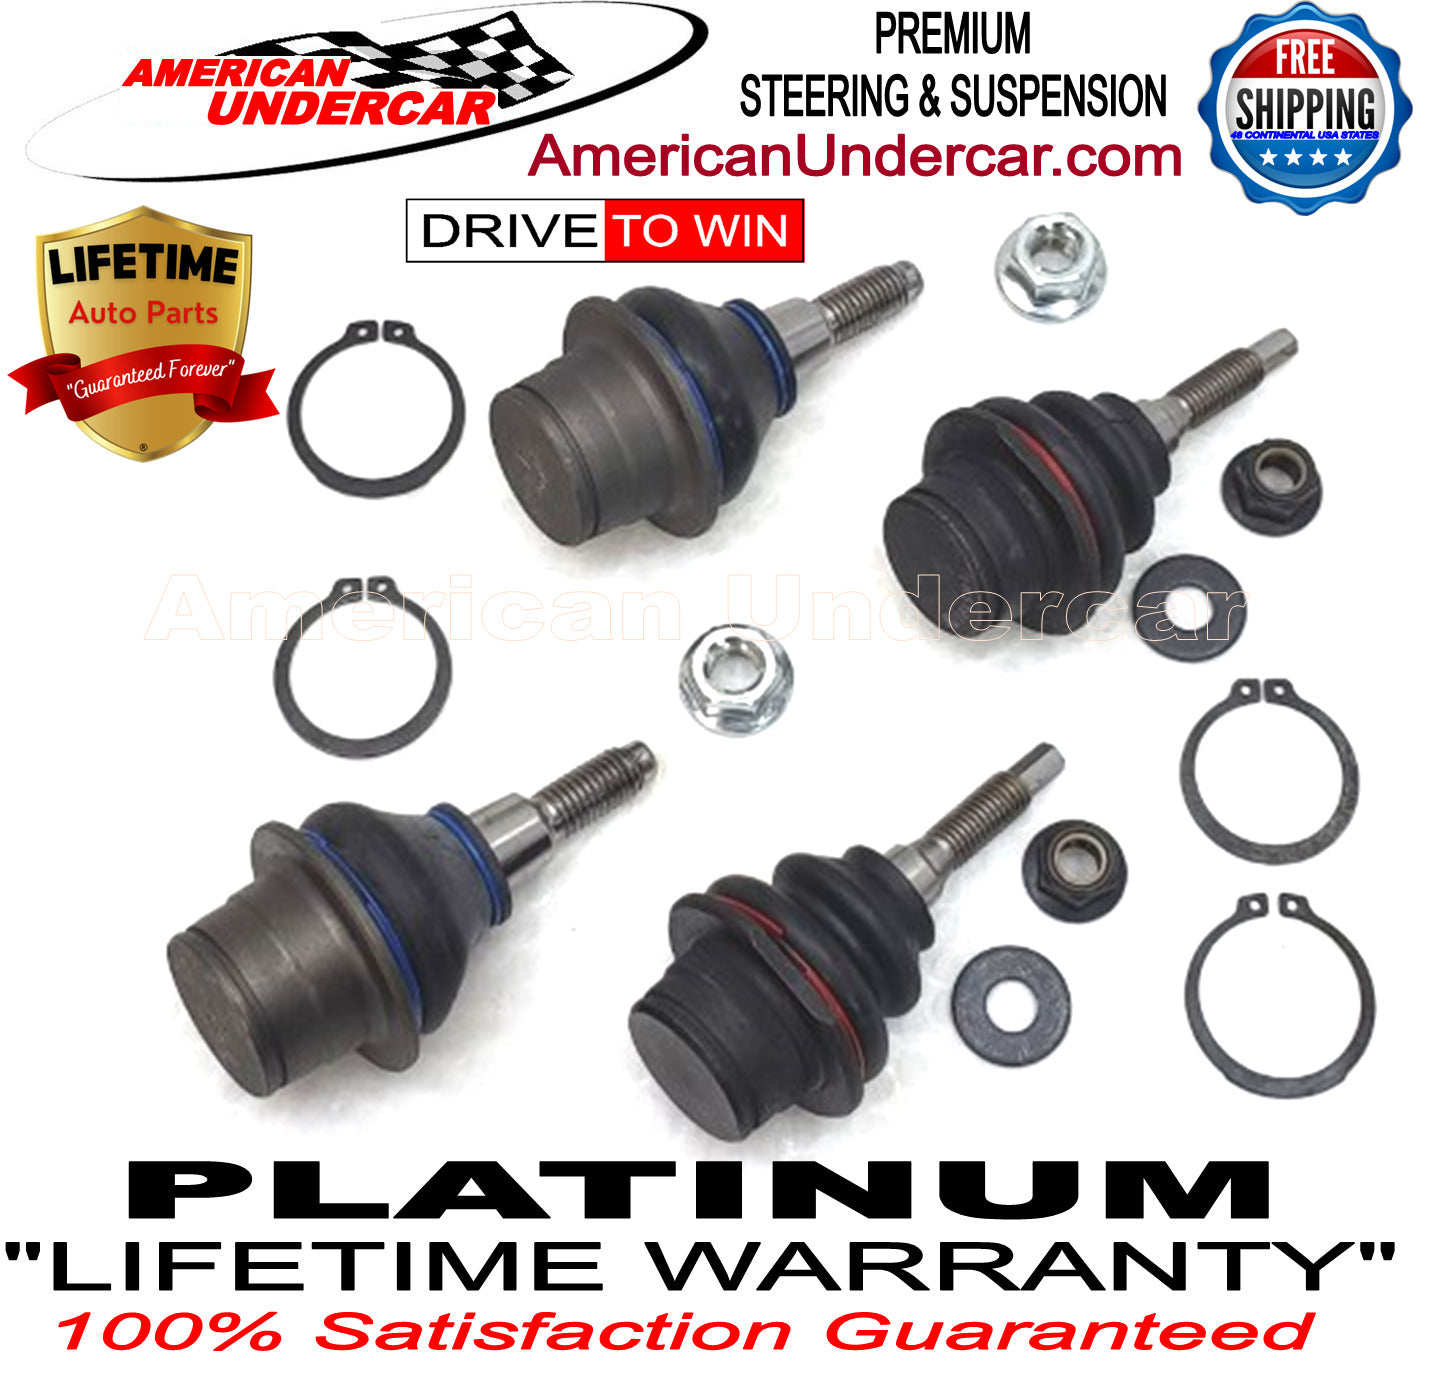 Lifetime Ball Joints Upper and Lower Suspension Kit for 2018-2021 Ford Expedition 4x4